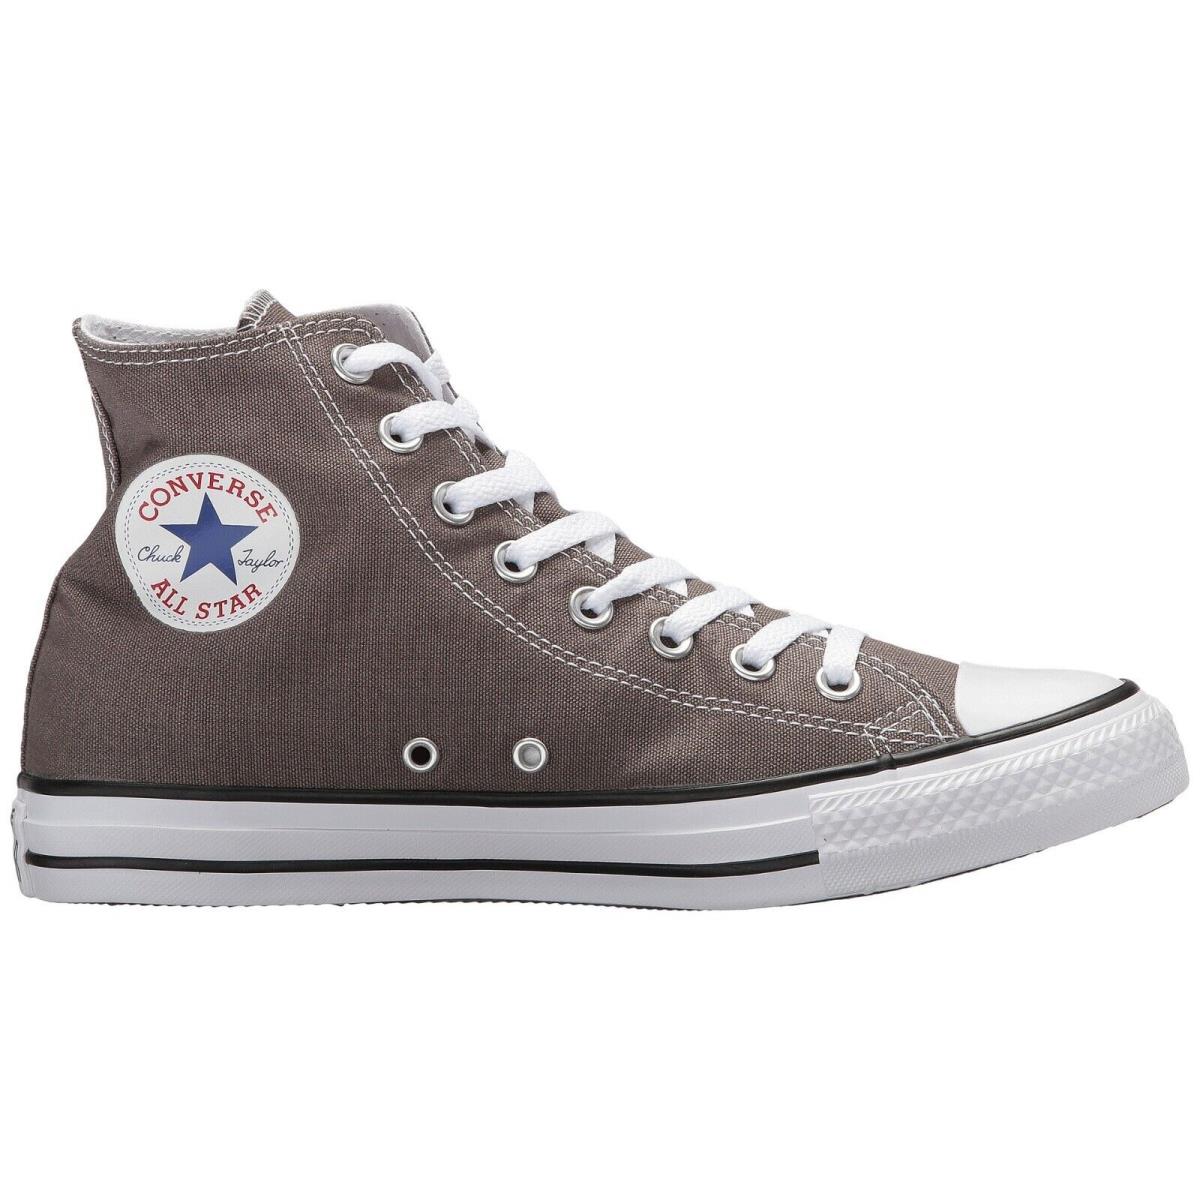 Converse Chuck Taylor All Star High Top Unisex Canvas Sneaker Classic Shoes Charcoal